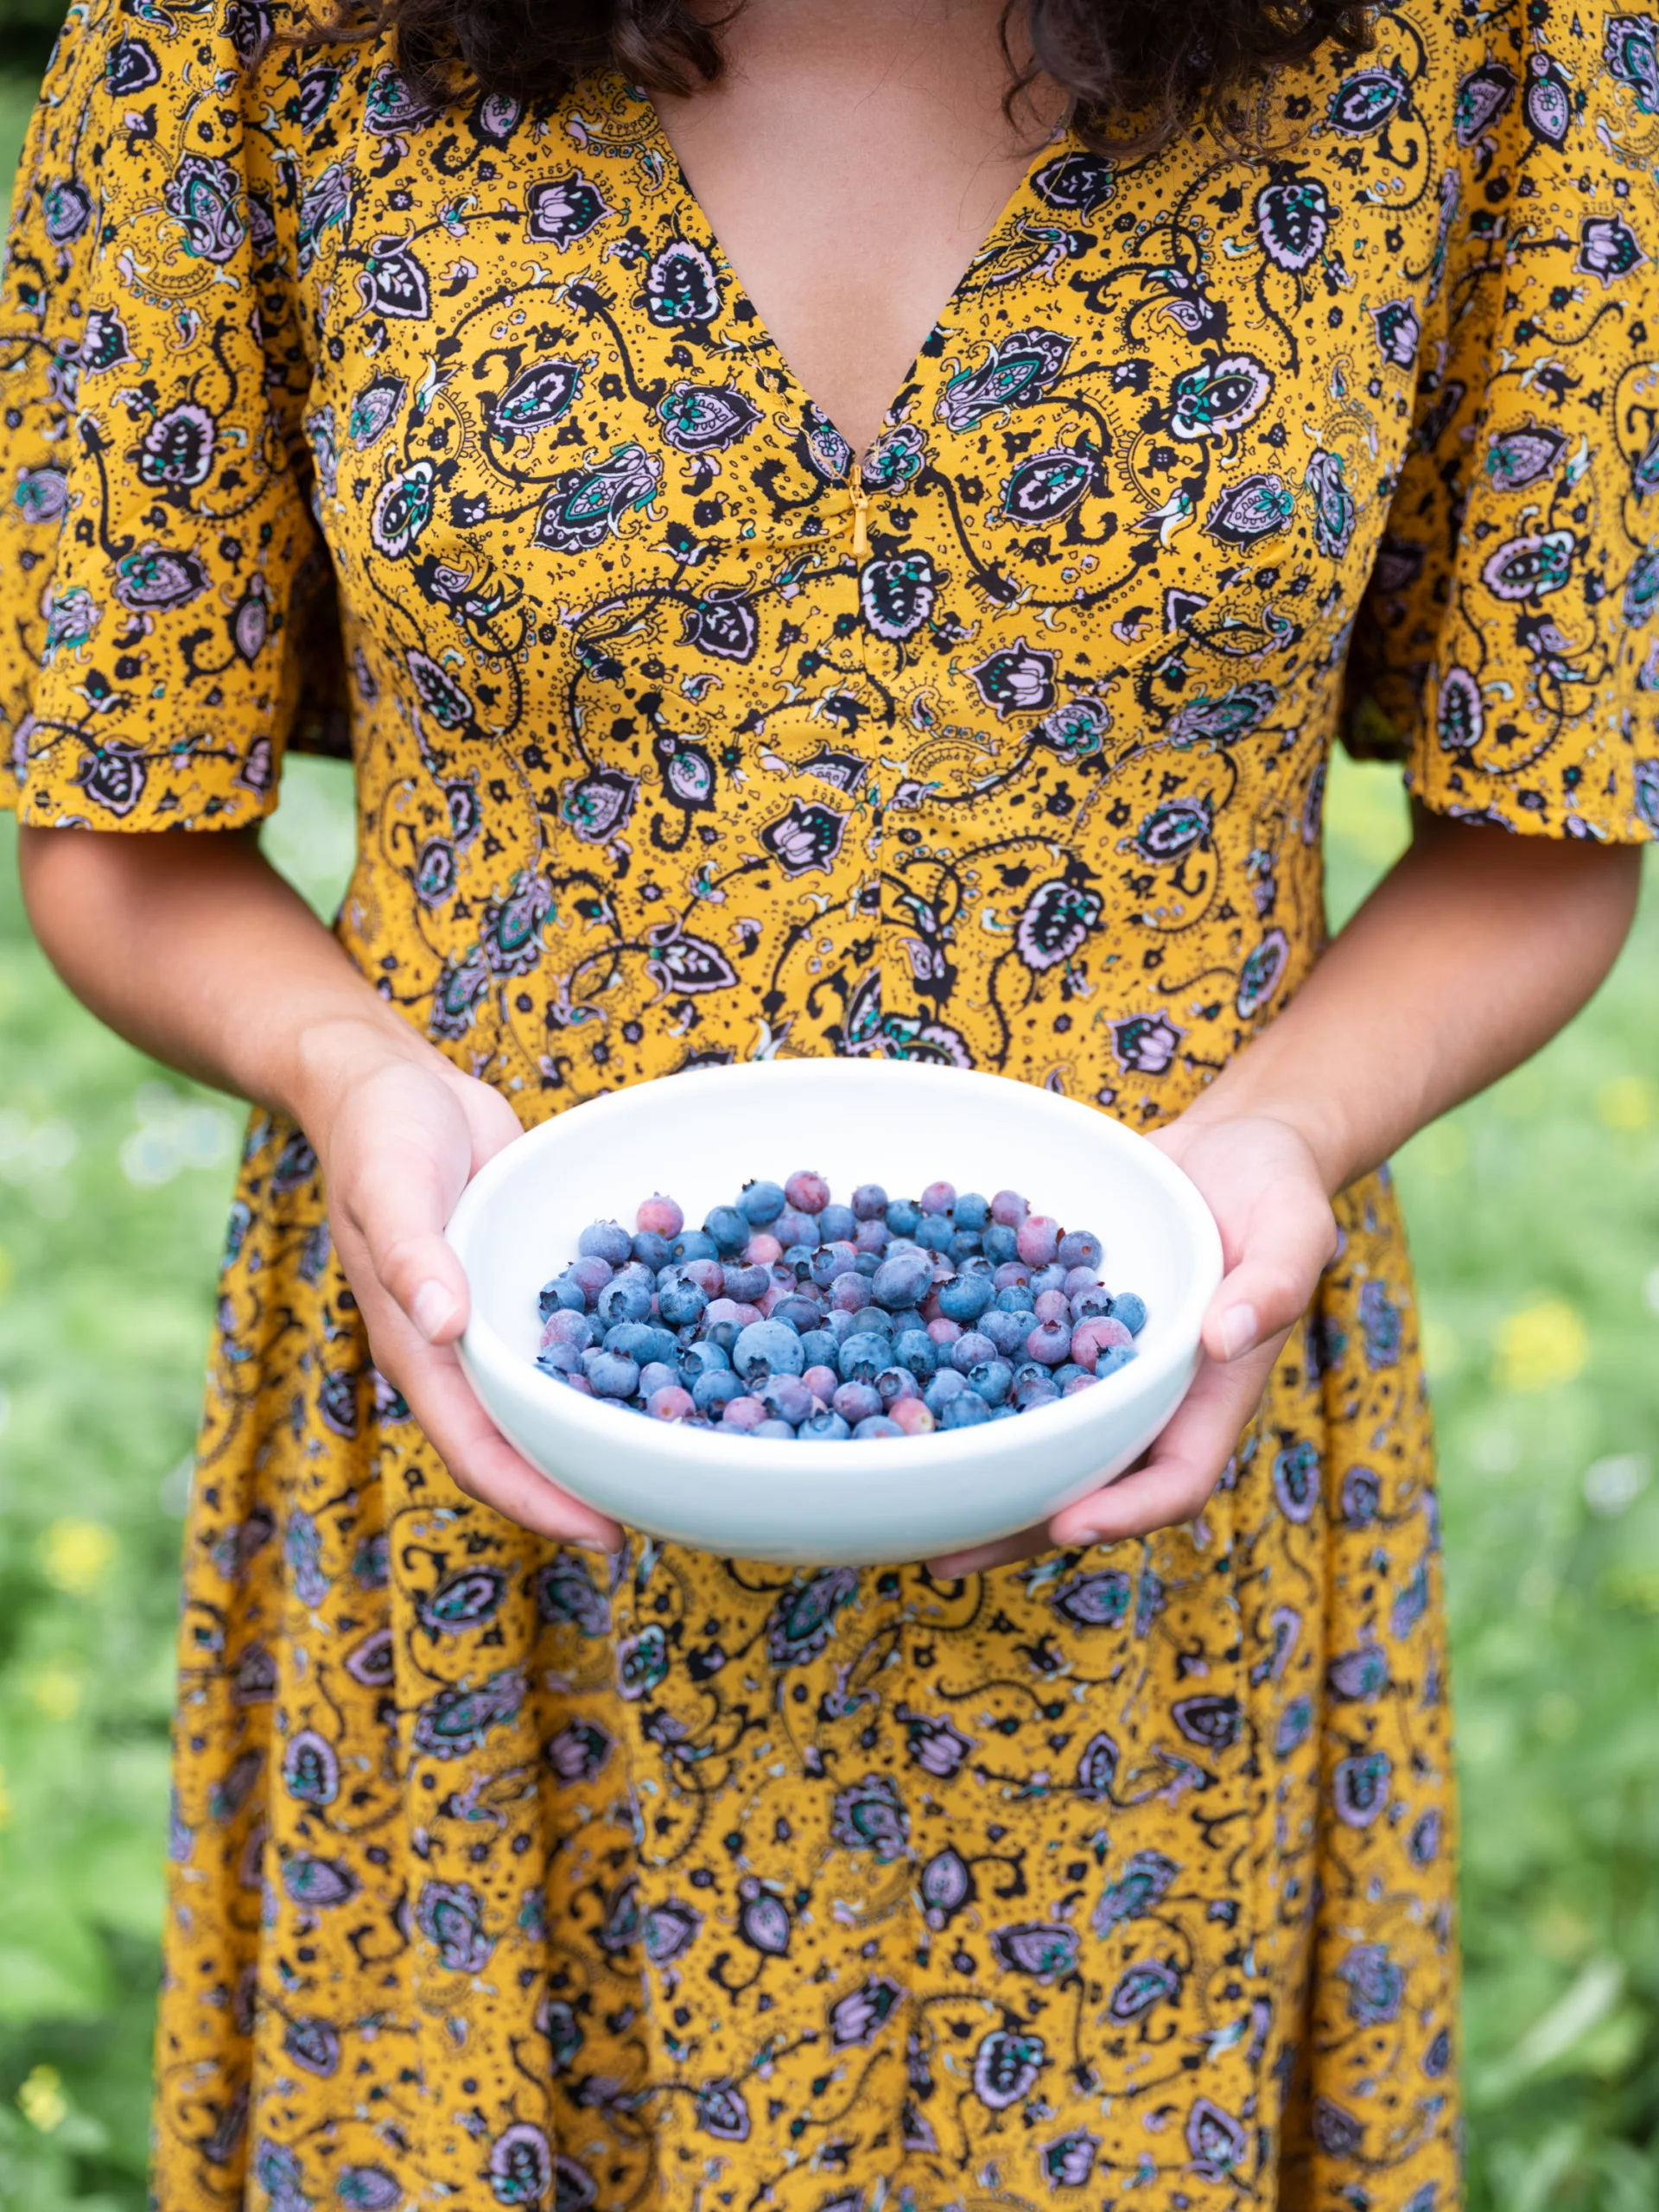 Woman in a yellow and blue dress holding a bowl full of Blueberries